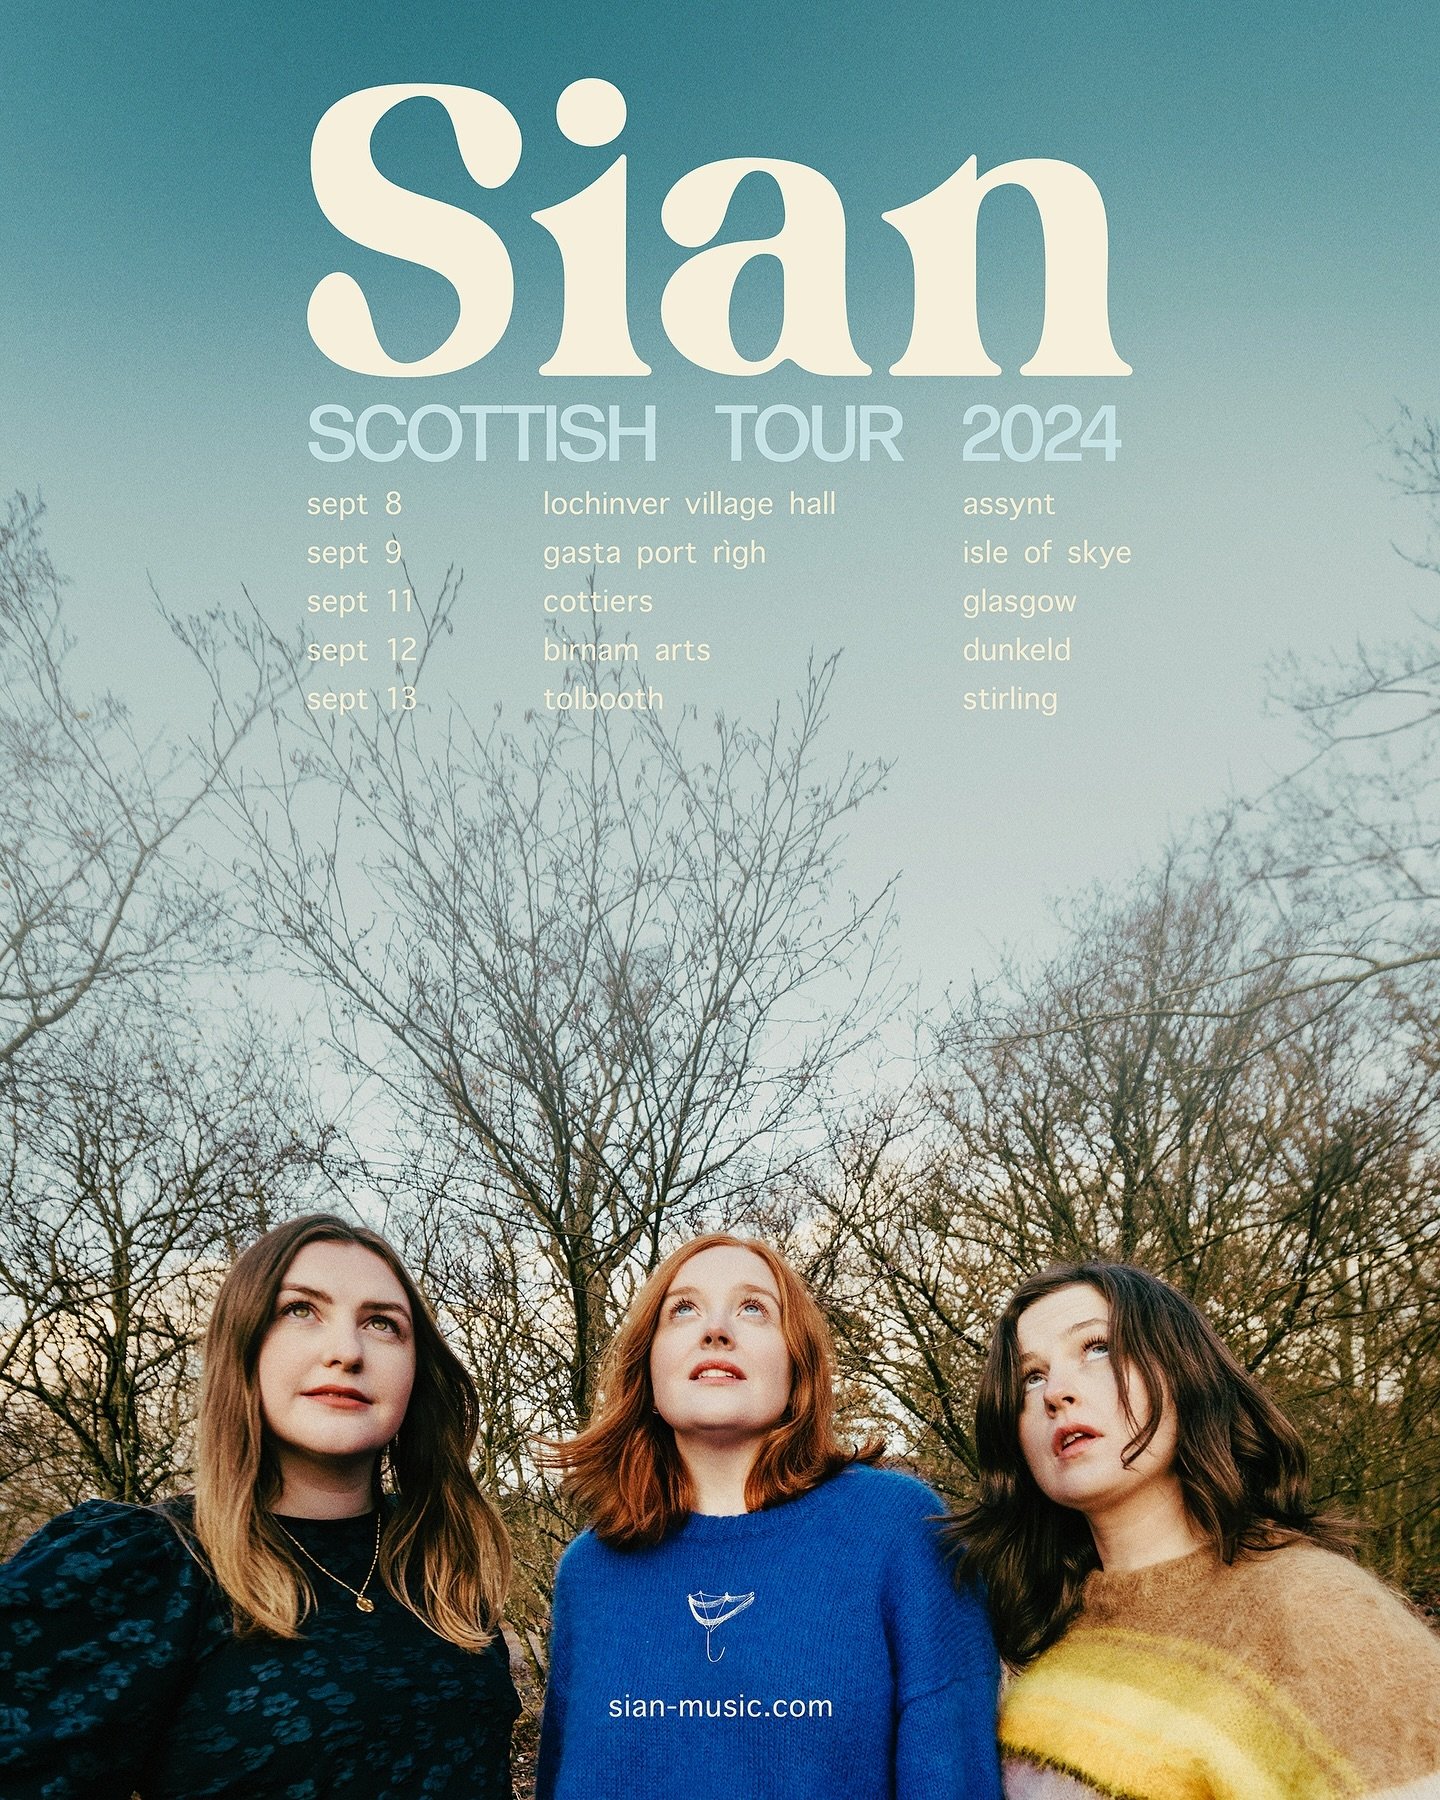 The Scottish tour @sianceol 🌀 

Tickets on sale Friday May 3 at 9am. GLASGOW artist presale starts Thurs, May 2 at 9am, ch&igrave; sinn an sibh.
Sign up to their mailing list for access 🎟️

8 Assynt @yellowdooreventscic 
9 Isle of Skye @deligasta 
